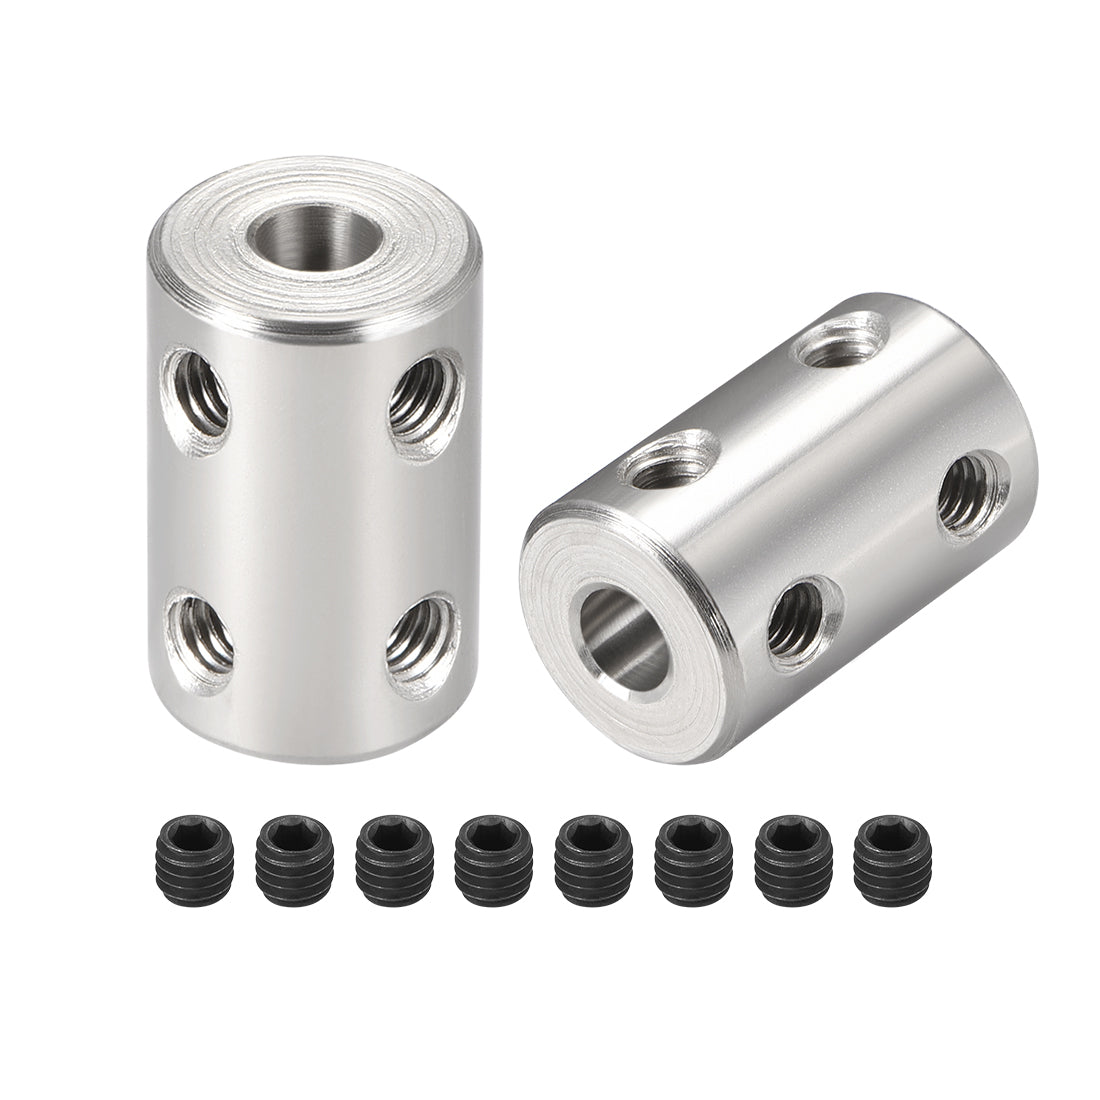 uxcell Uxcell Shaft Coupling 5mm to 5mm Bore L22xD14 Robot Motor Wheel Rigid Coupler Connector Silver Tone 2 Pcs